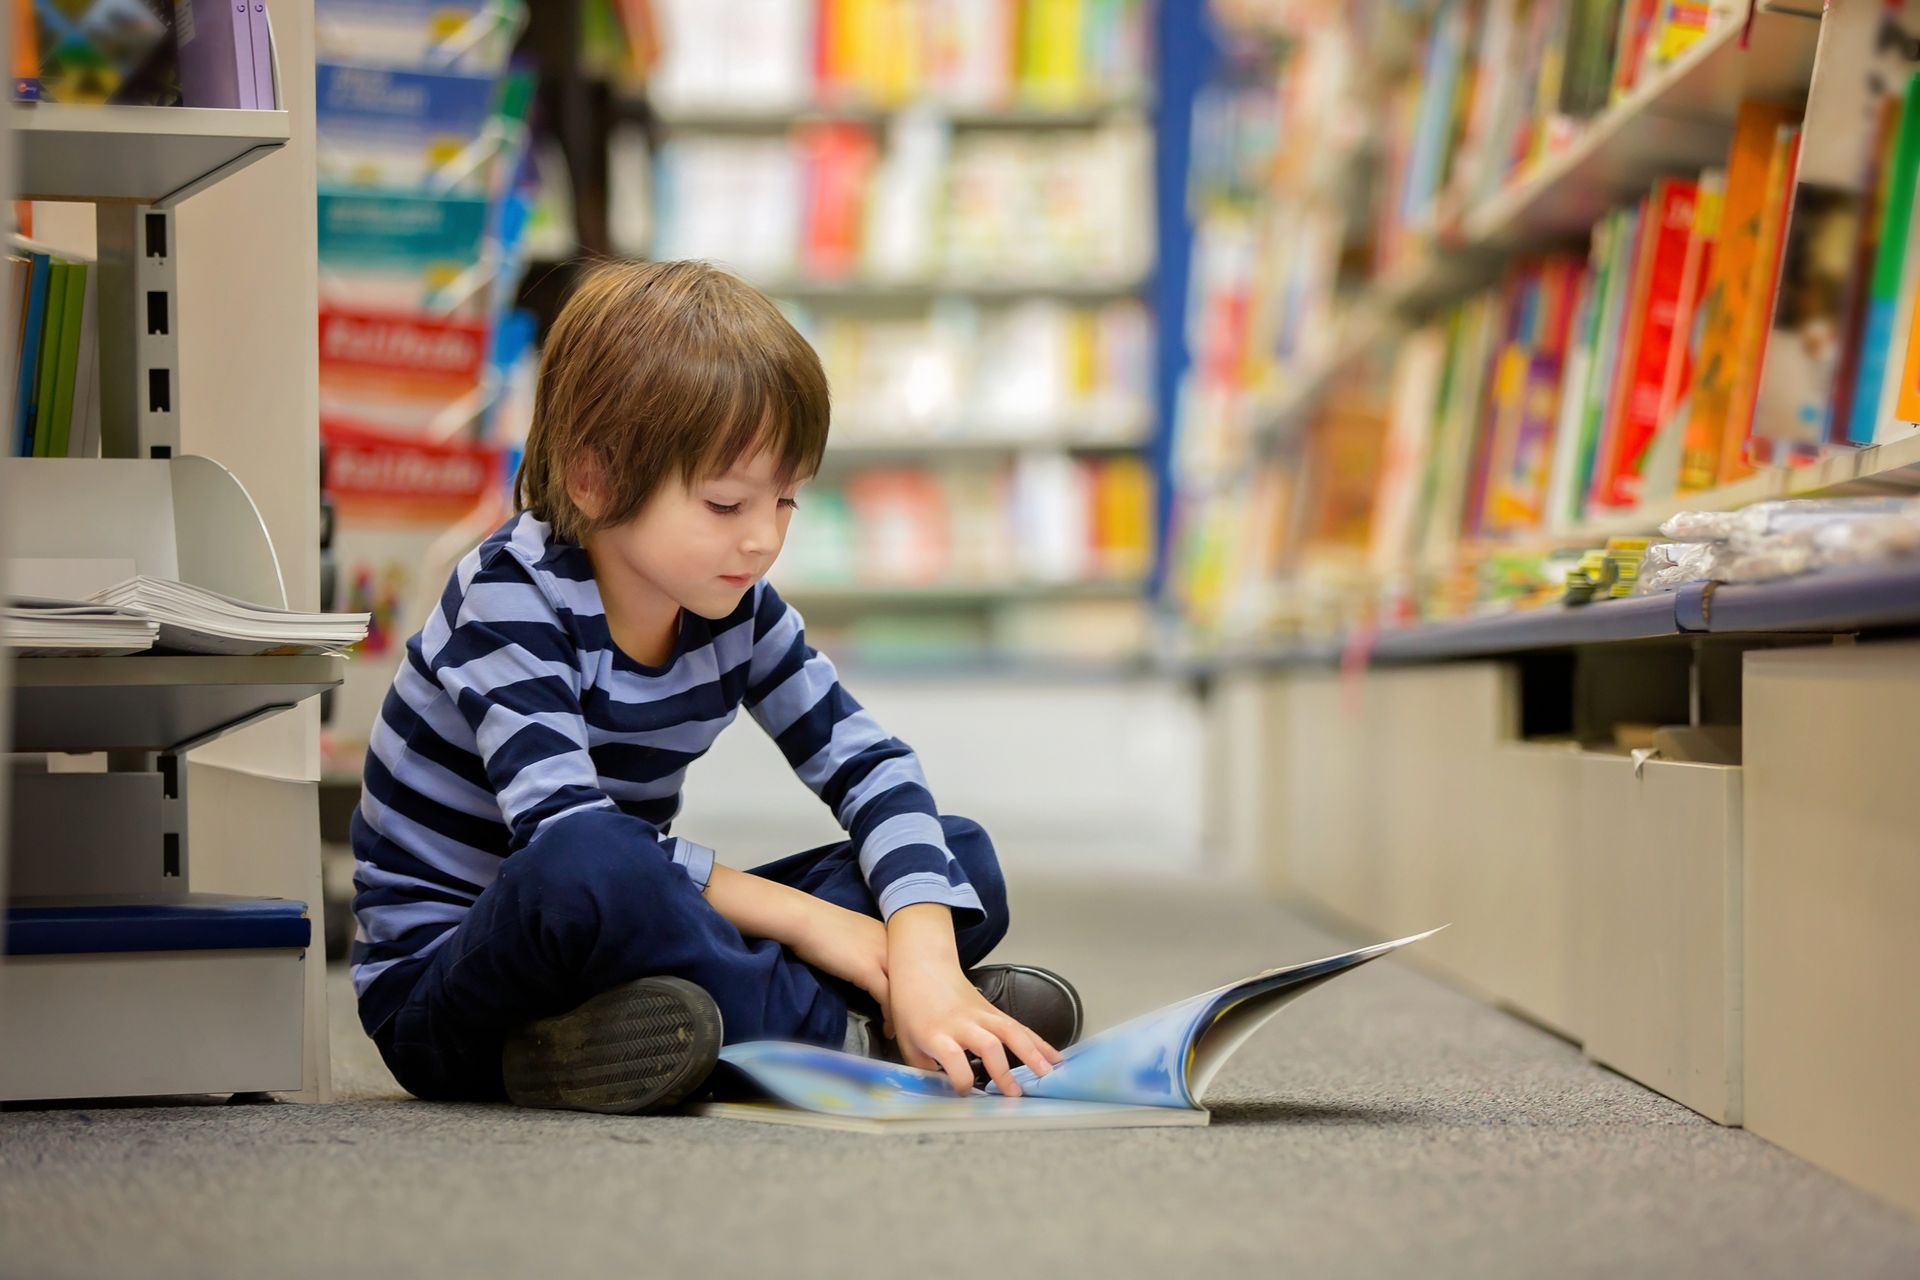 Boy reading a book as he sits on the floor at a library